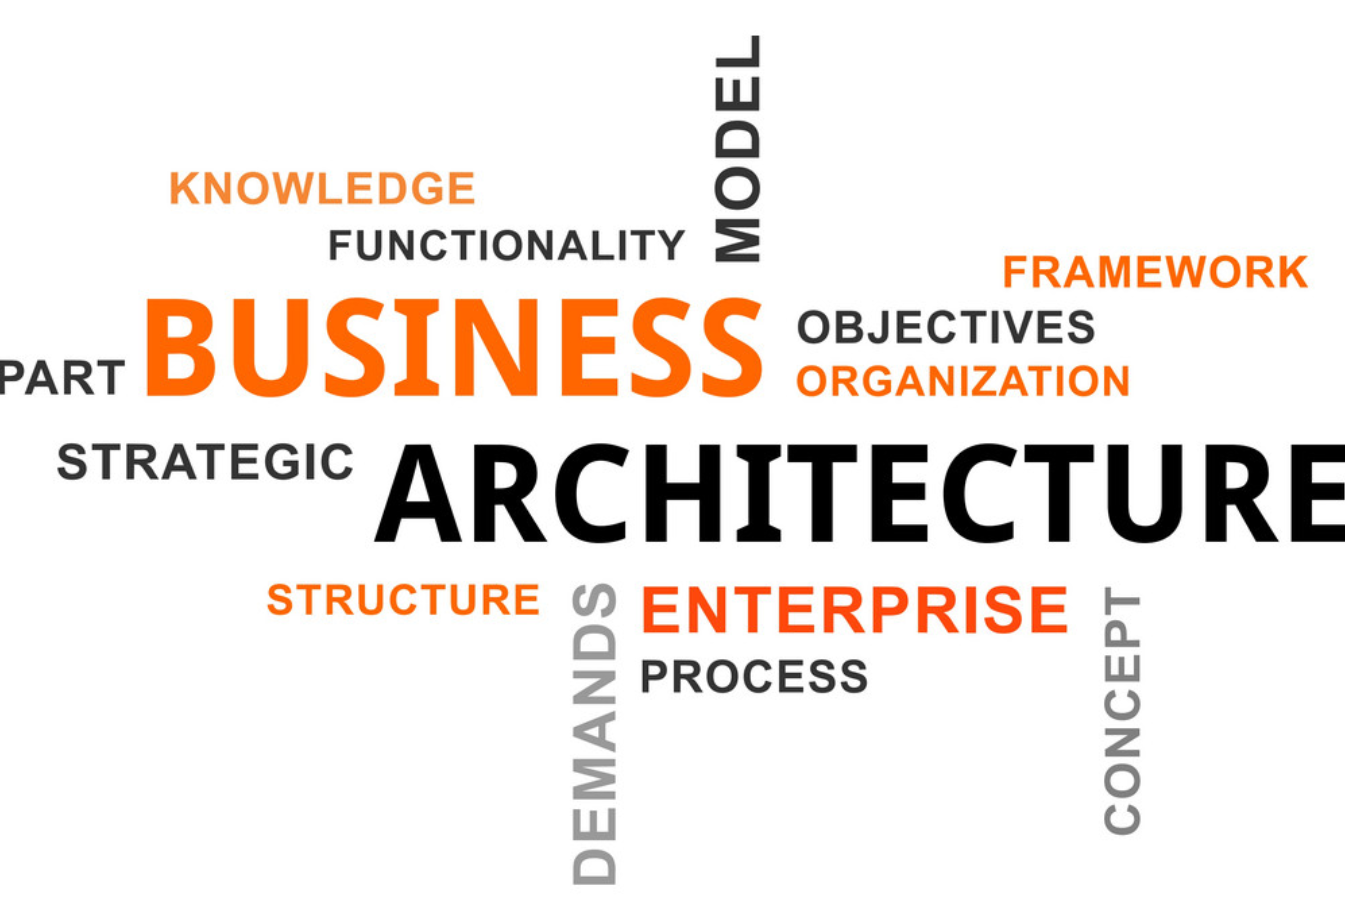 What is Business Architecture?